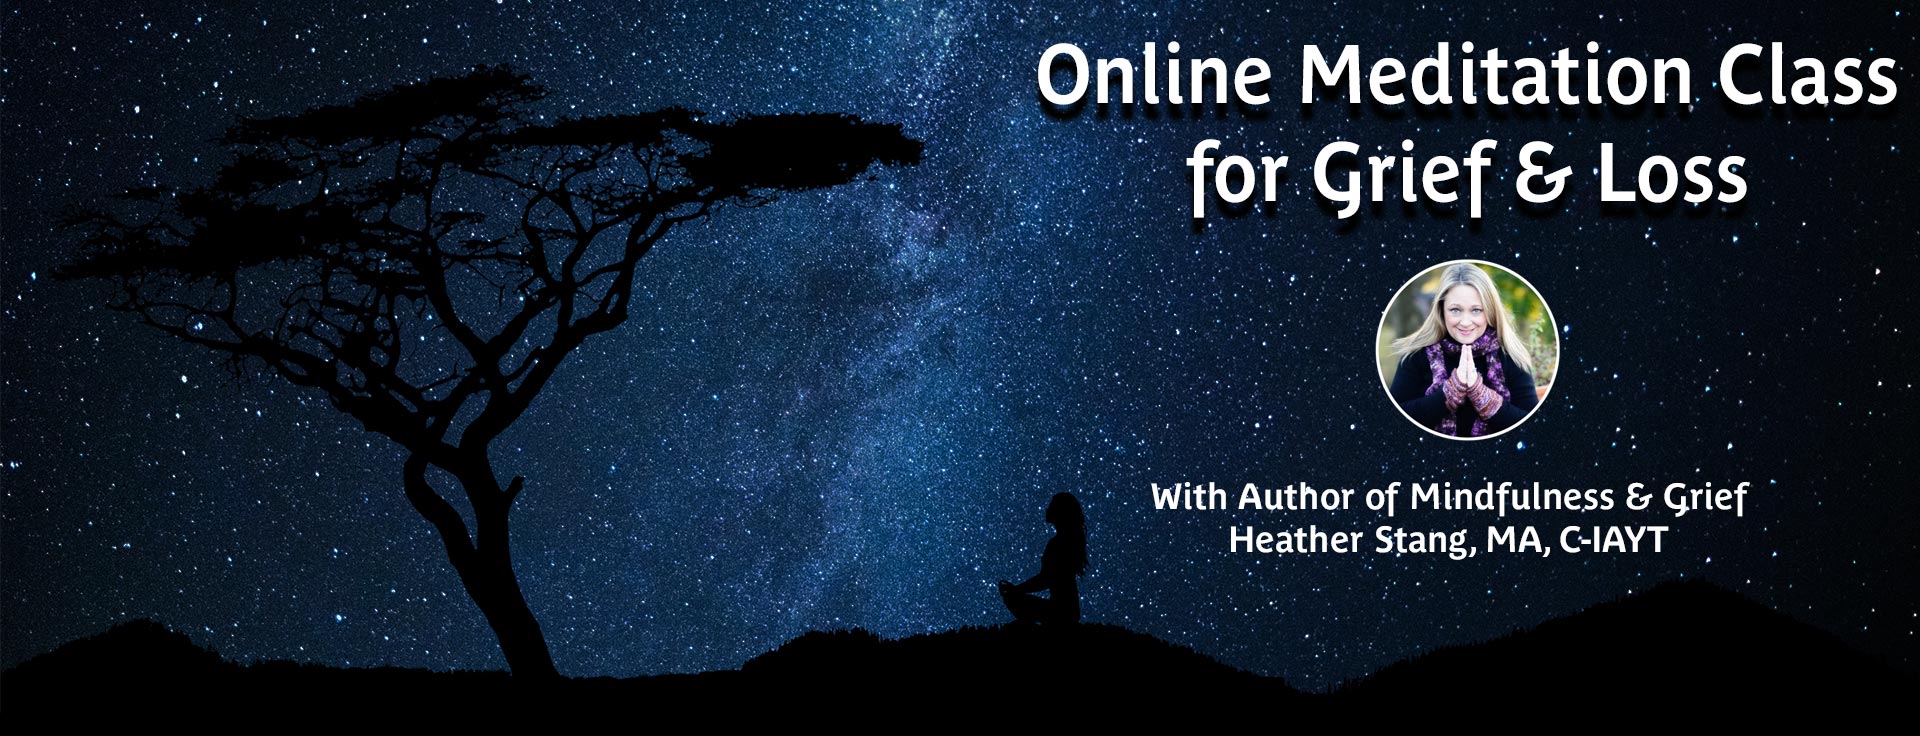 online meditation class for grief and loss short